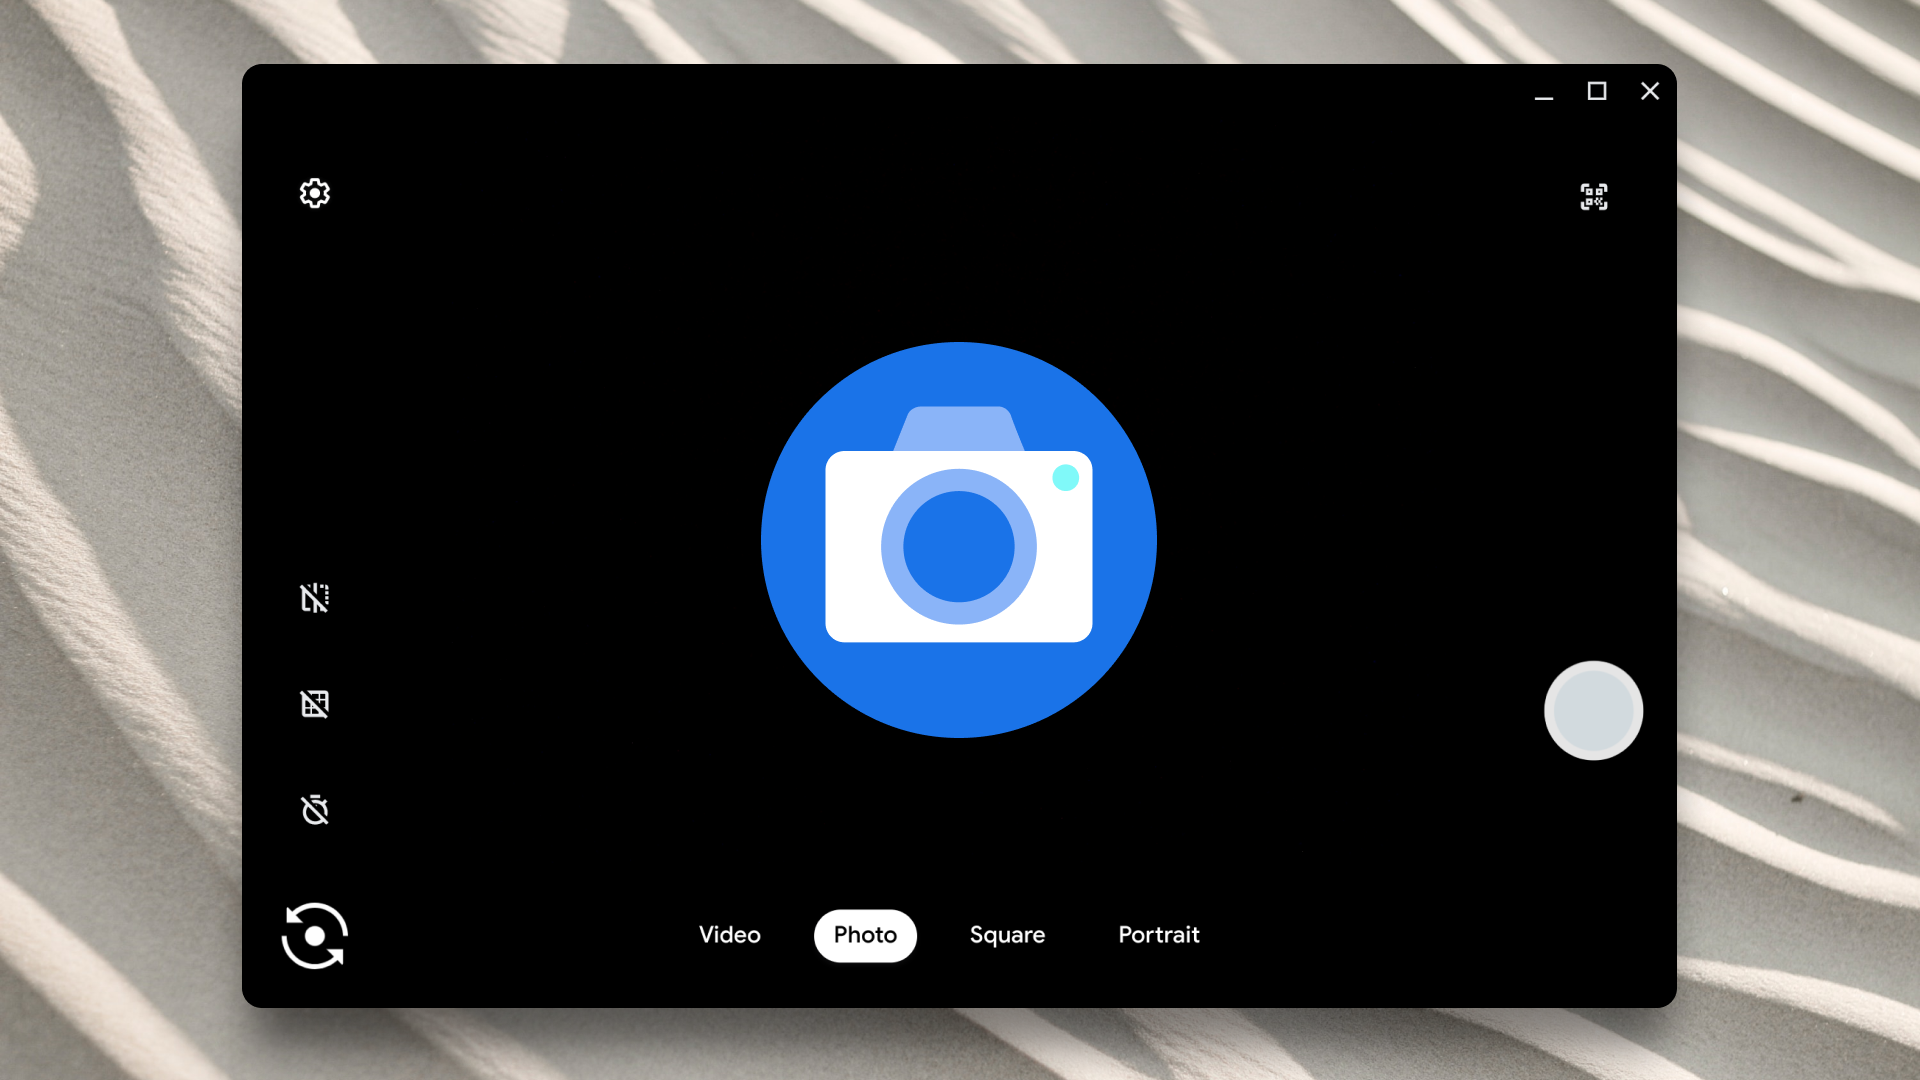 GIF creation on Chromebooks is about to become very simple